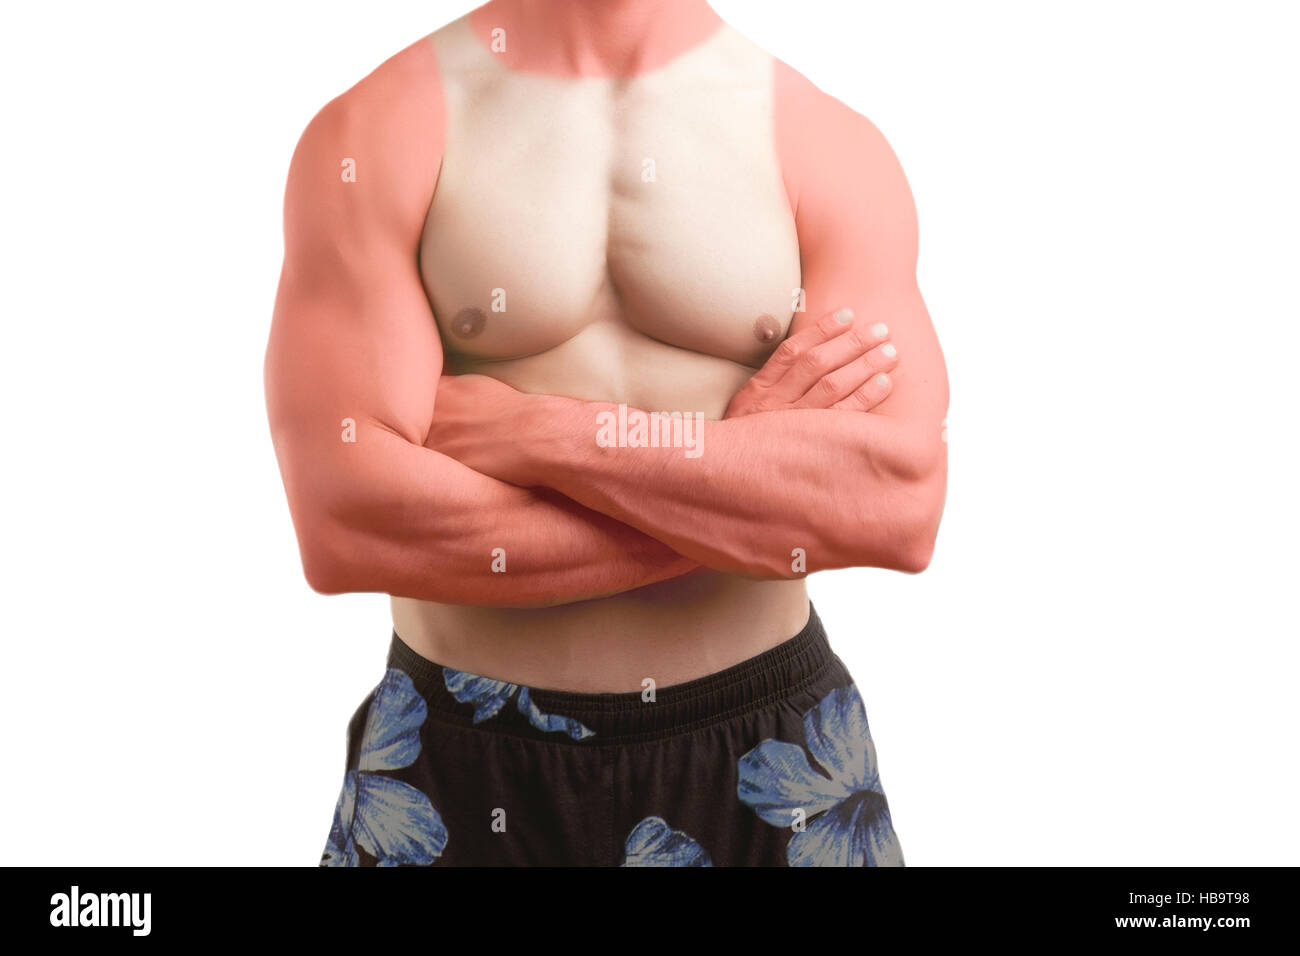 Fit Man Standing in a Beach With a Sunburn Stock Photo